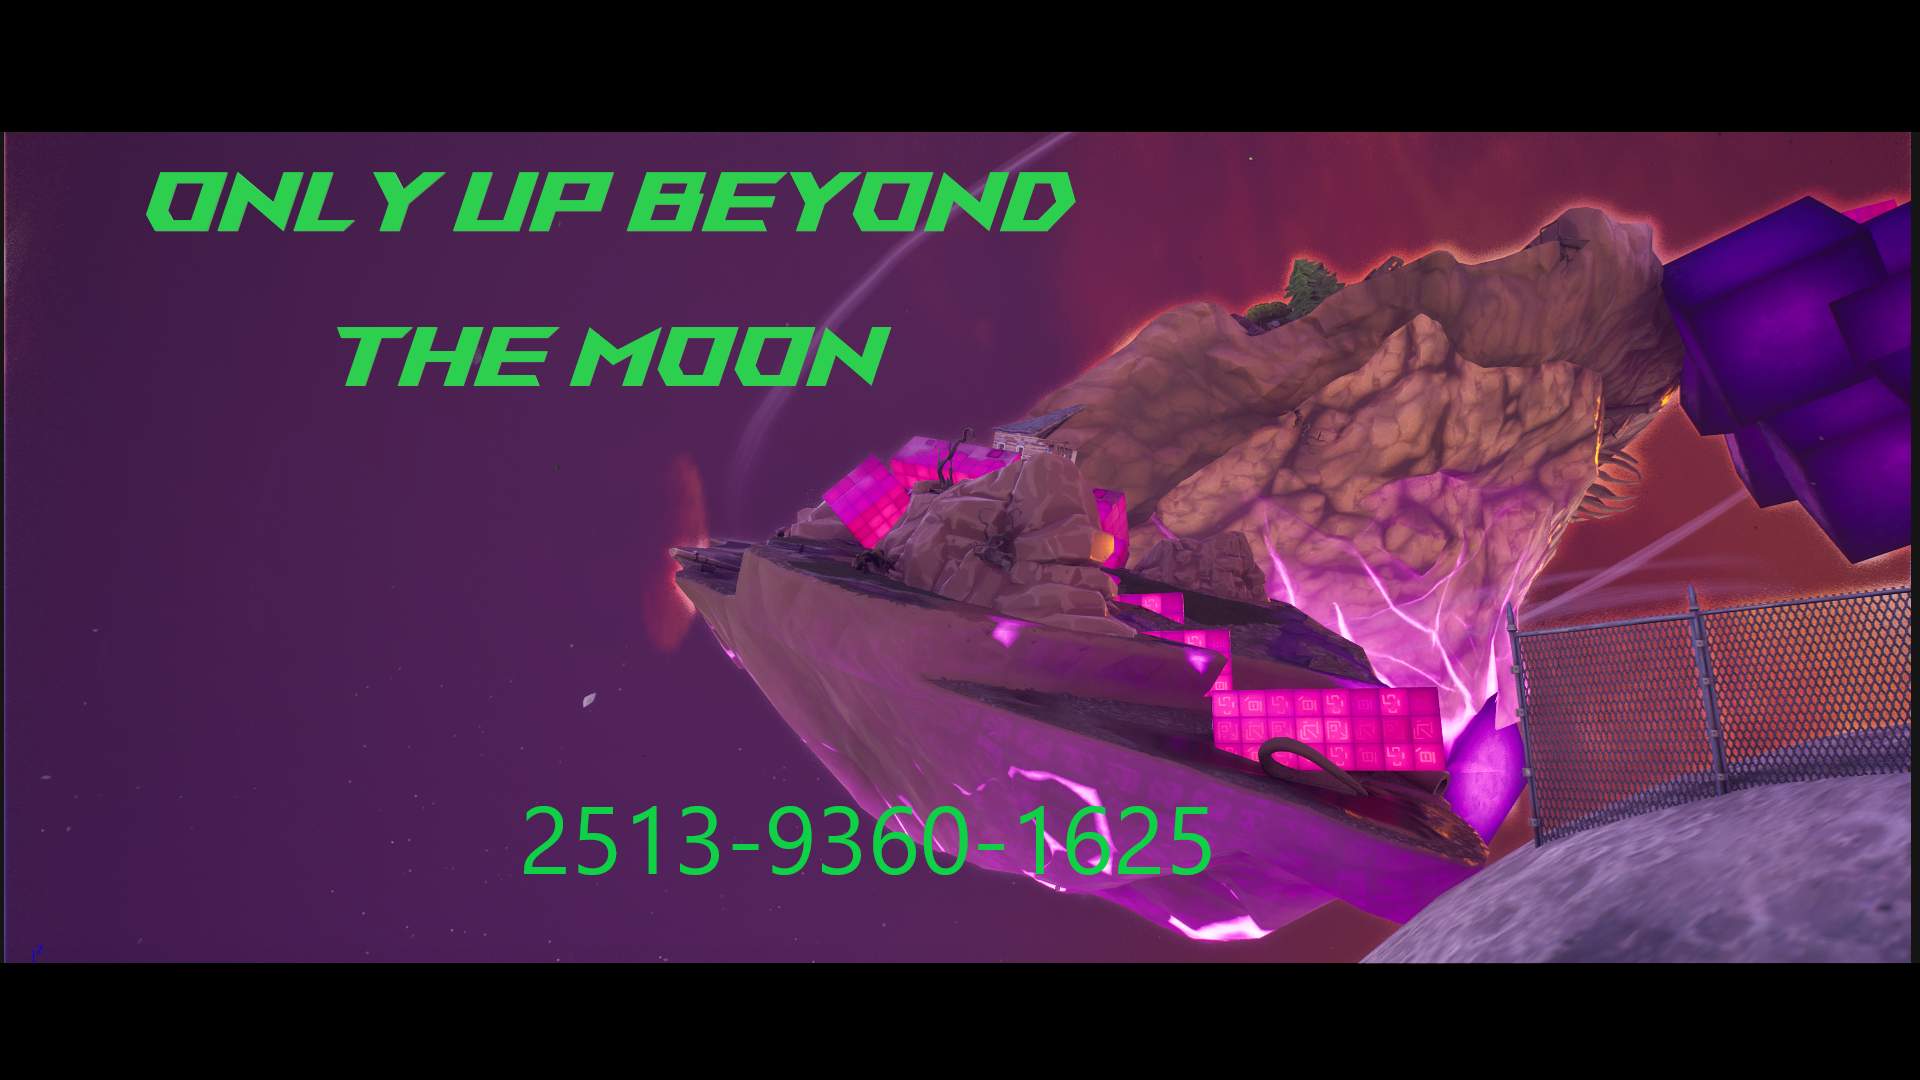 ONLY-UP BEYOND THE MOON